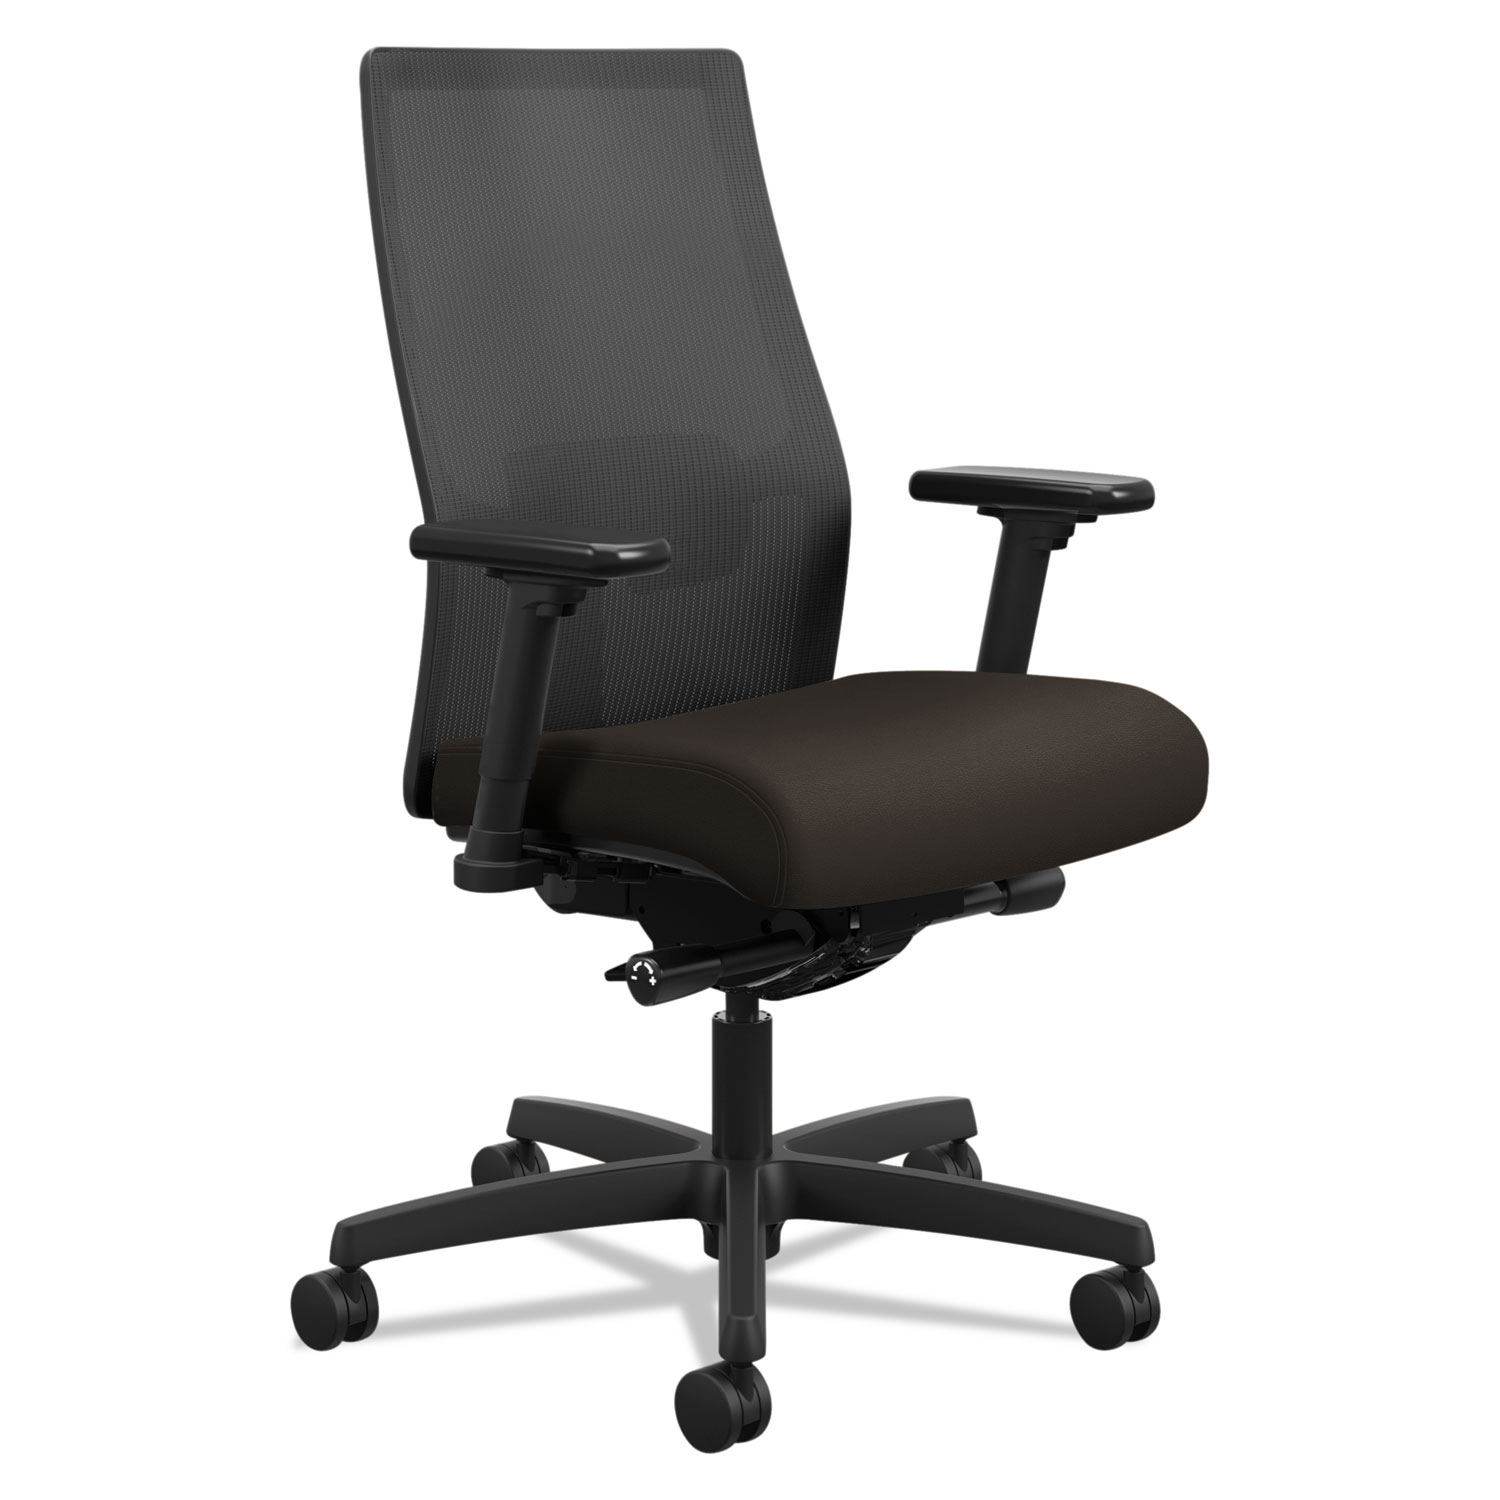  HON HONI2M2AMLC49TK Ignition 2.0 4-Way Stretch Mid-Back Mesh Task Chair, Supports up to 300 lbs., Espresso Seat, Black Back/Base (HONI2M2AMLC49TK) 